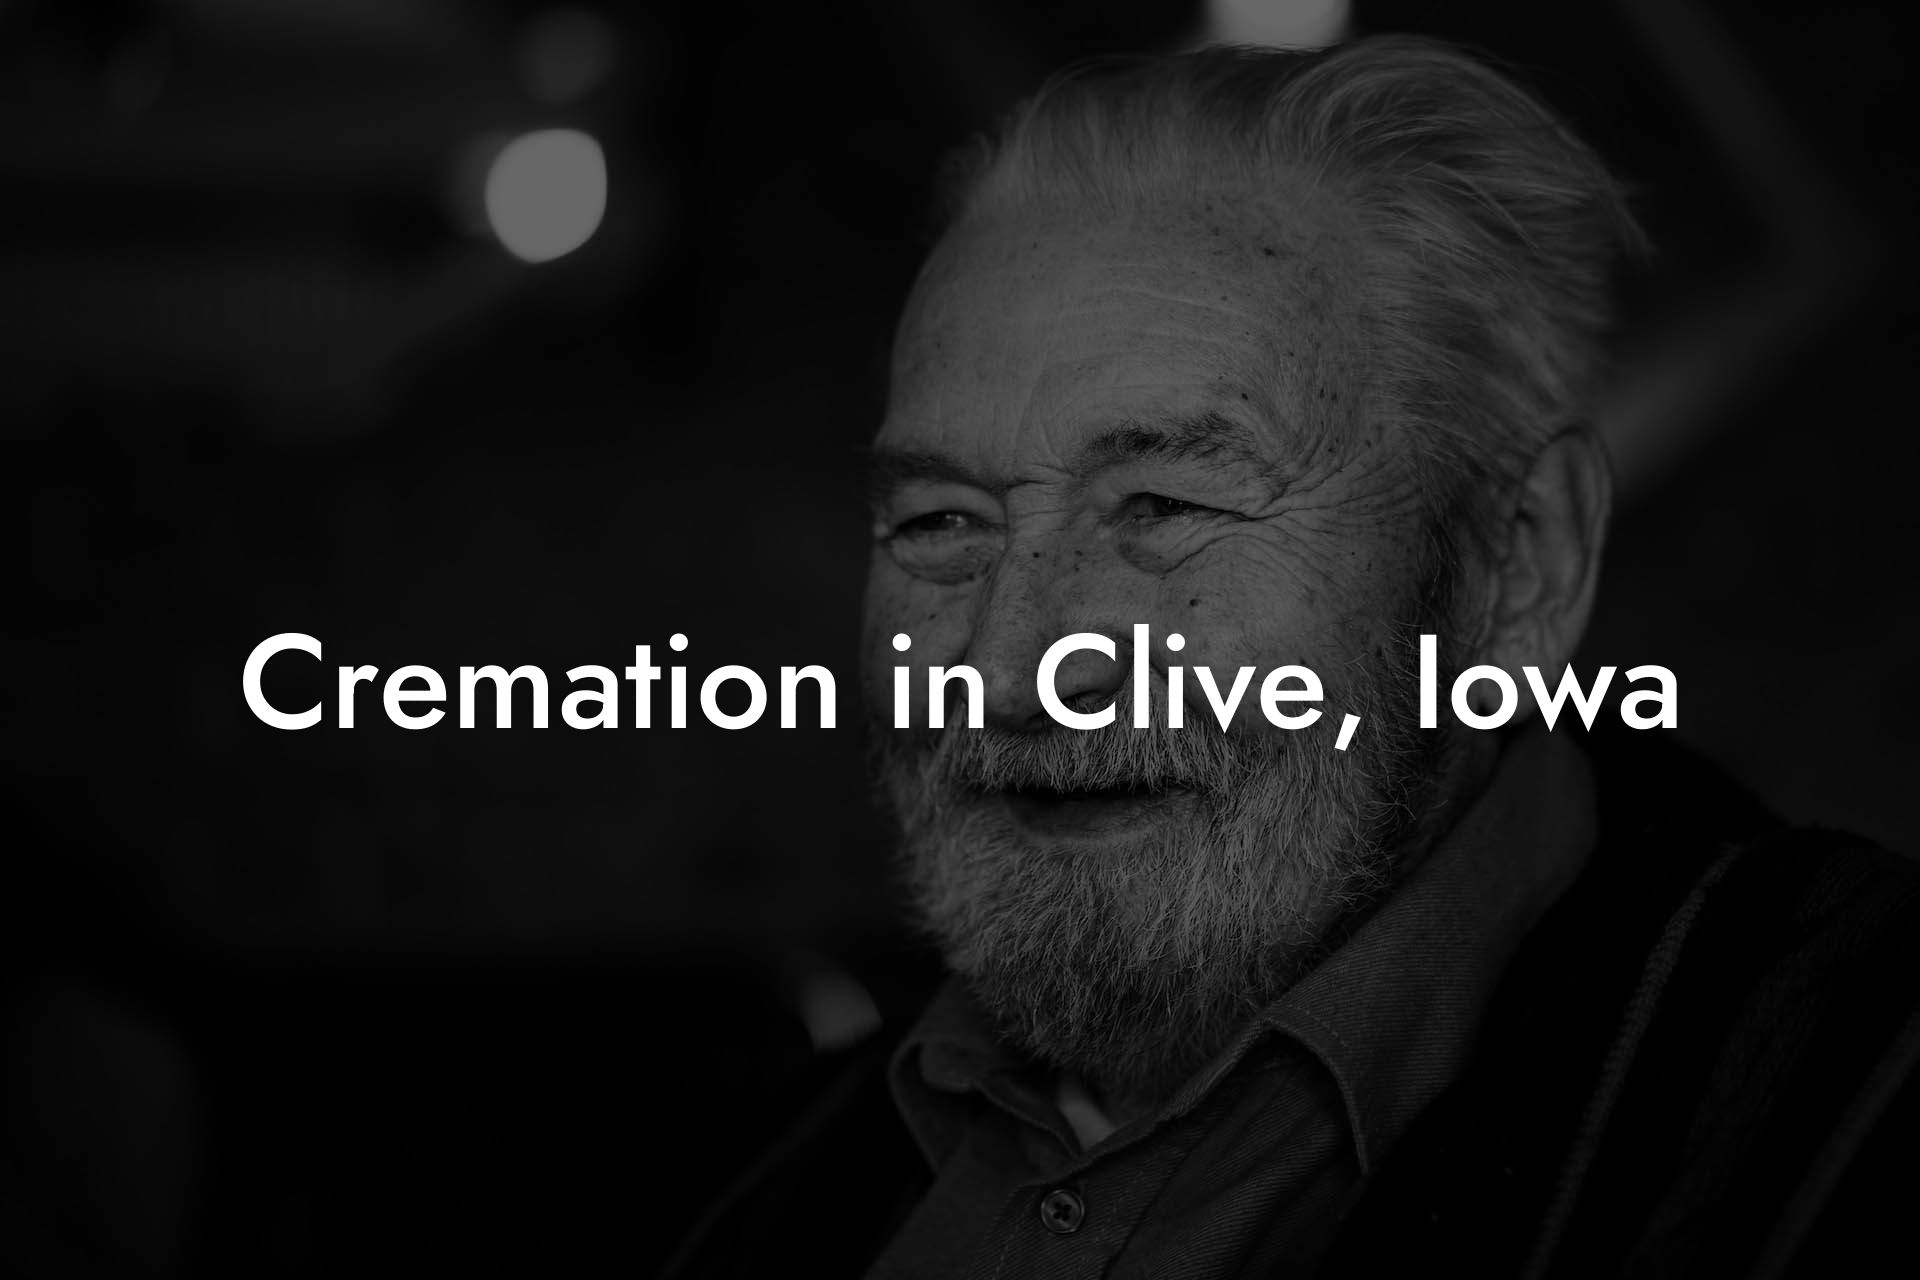 Cremation in Clive, Iowa